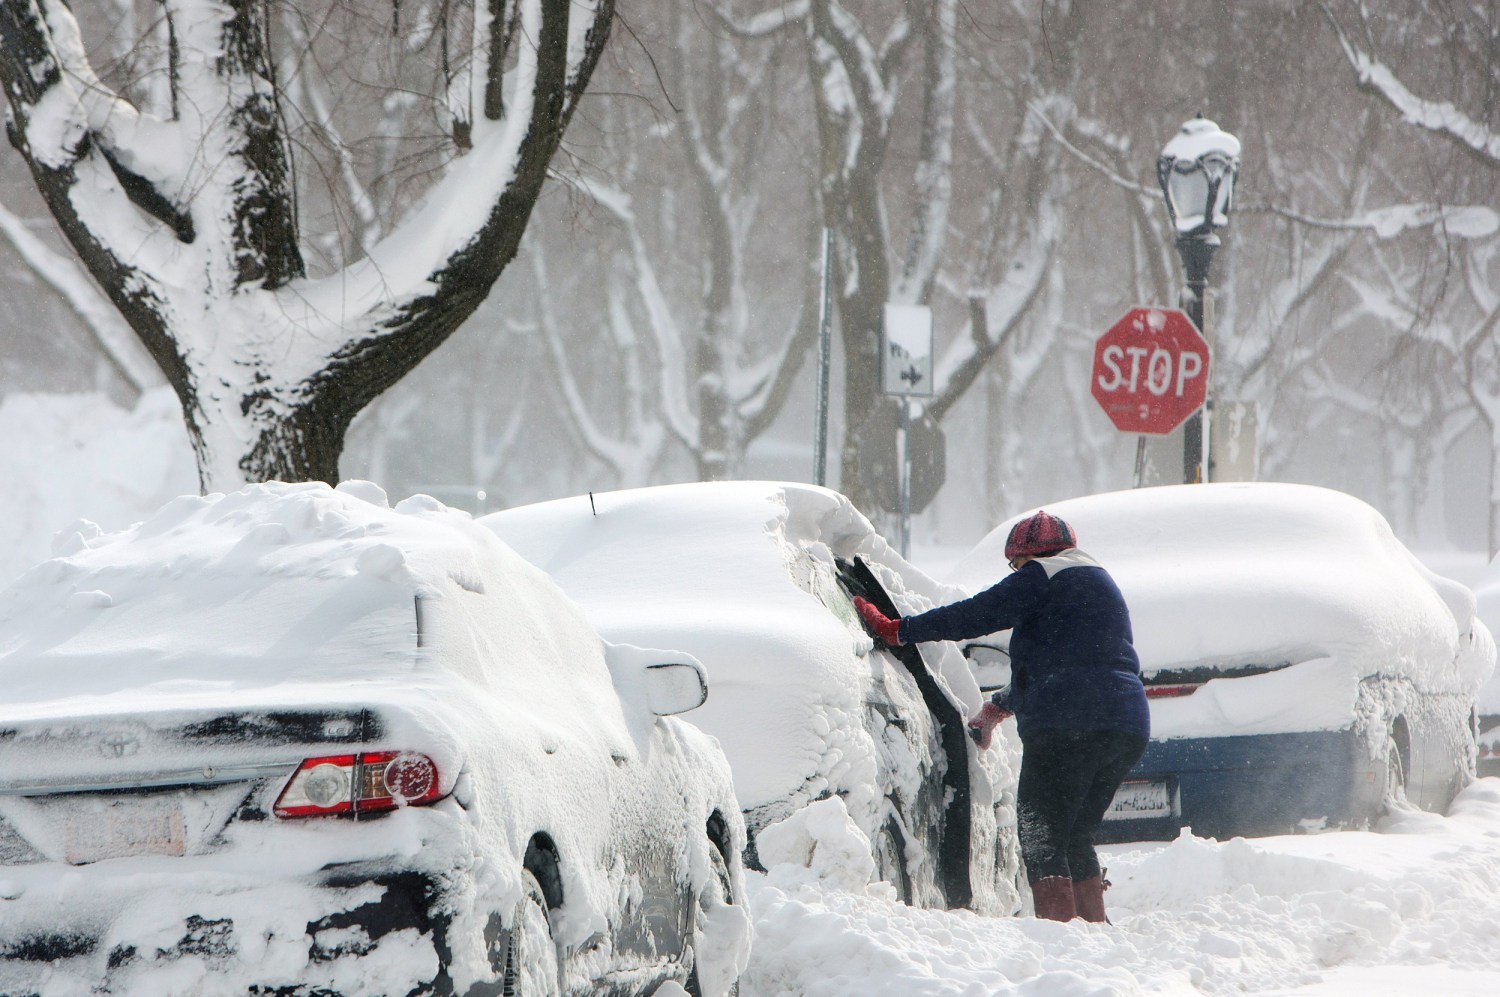 Weekend snowstorm good news for local businesses relying on winter  conditions